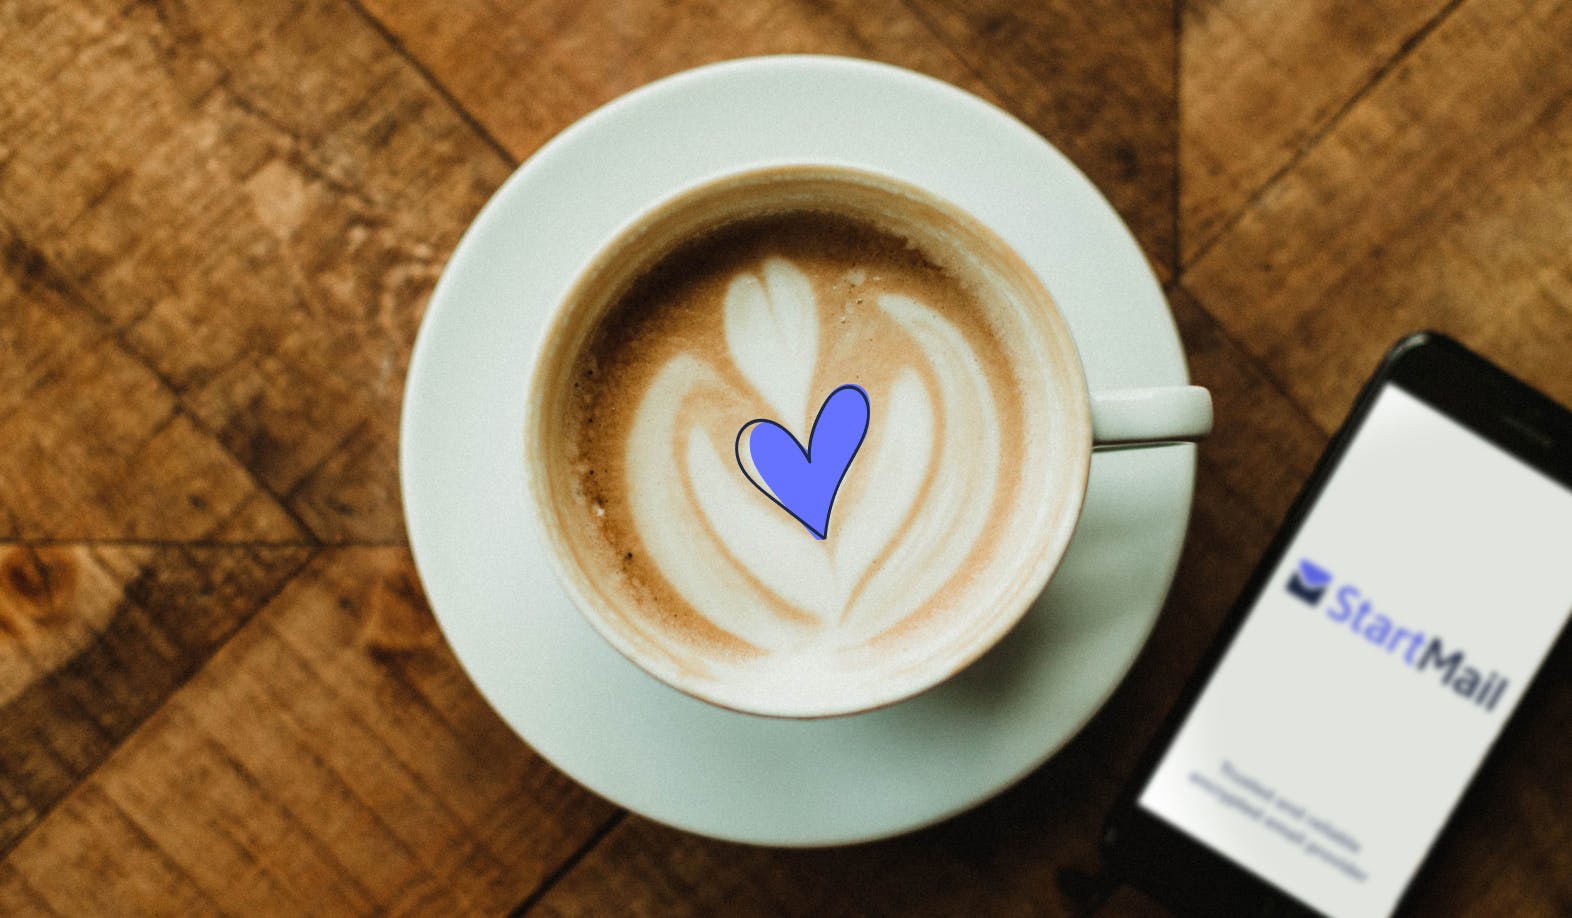 blogpost-image of a cappuccino with an illustrated heart, next to a phone displaying the StartMail logo